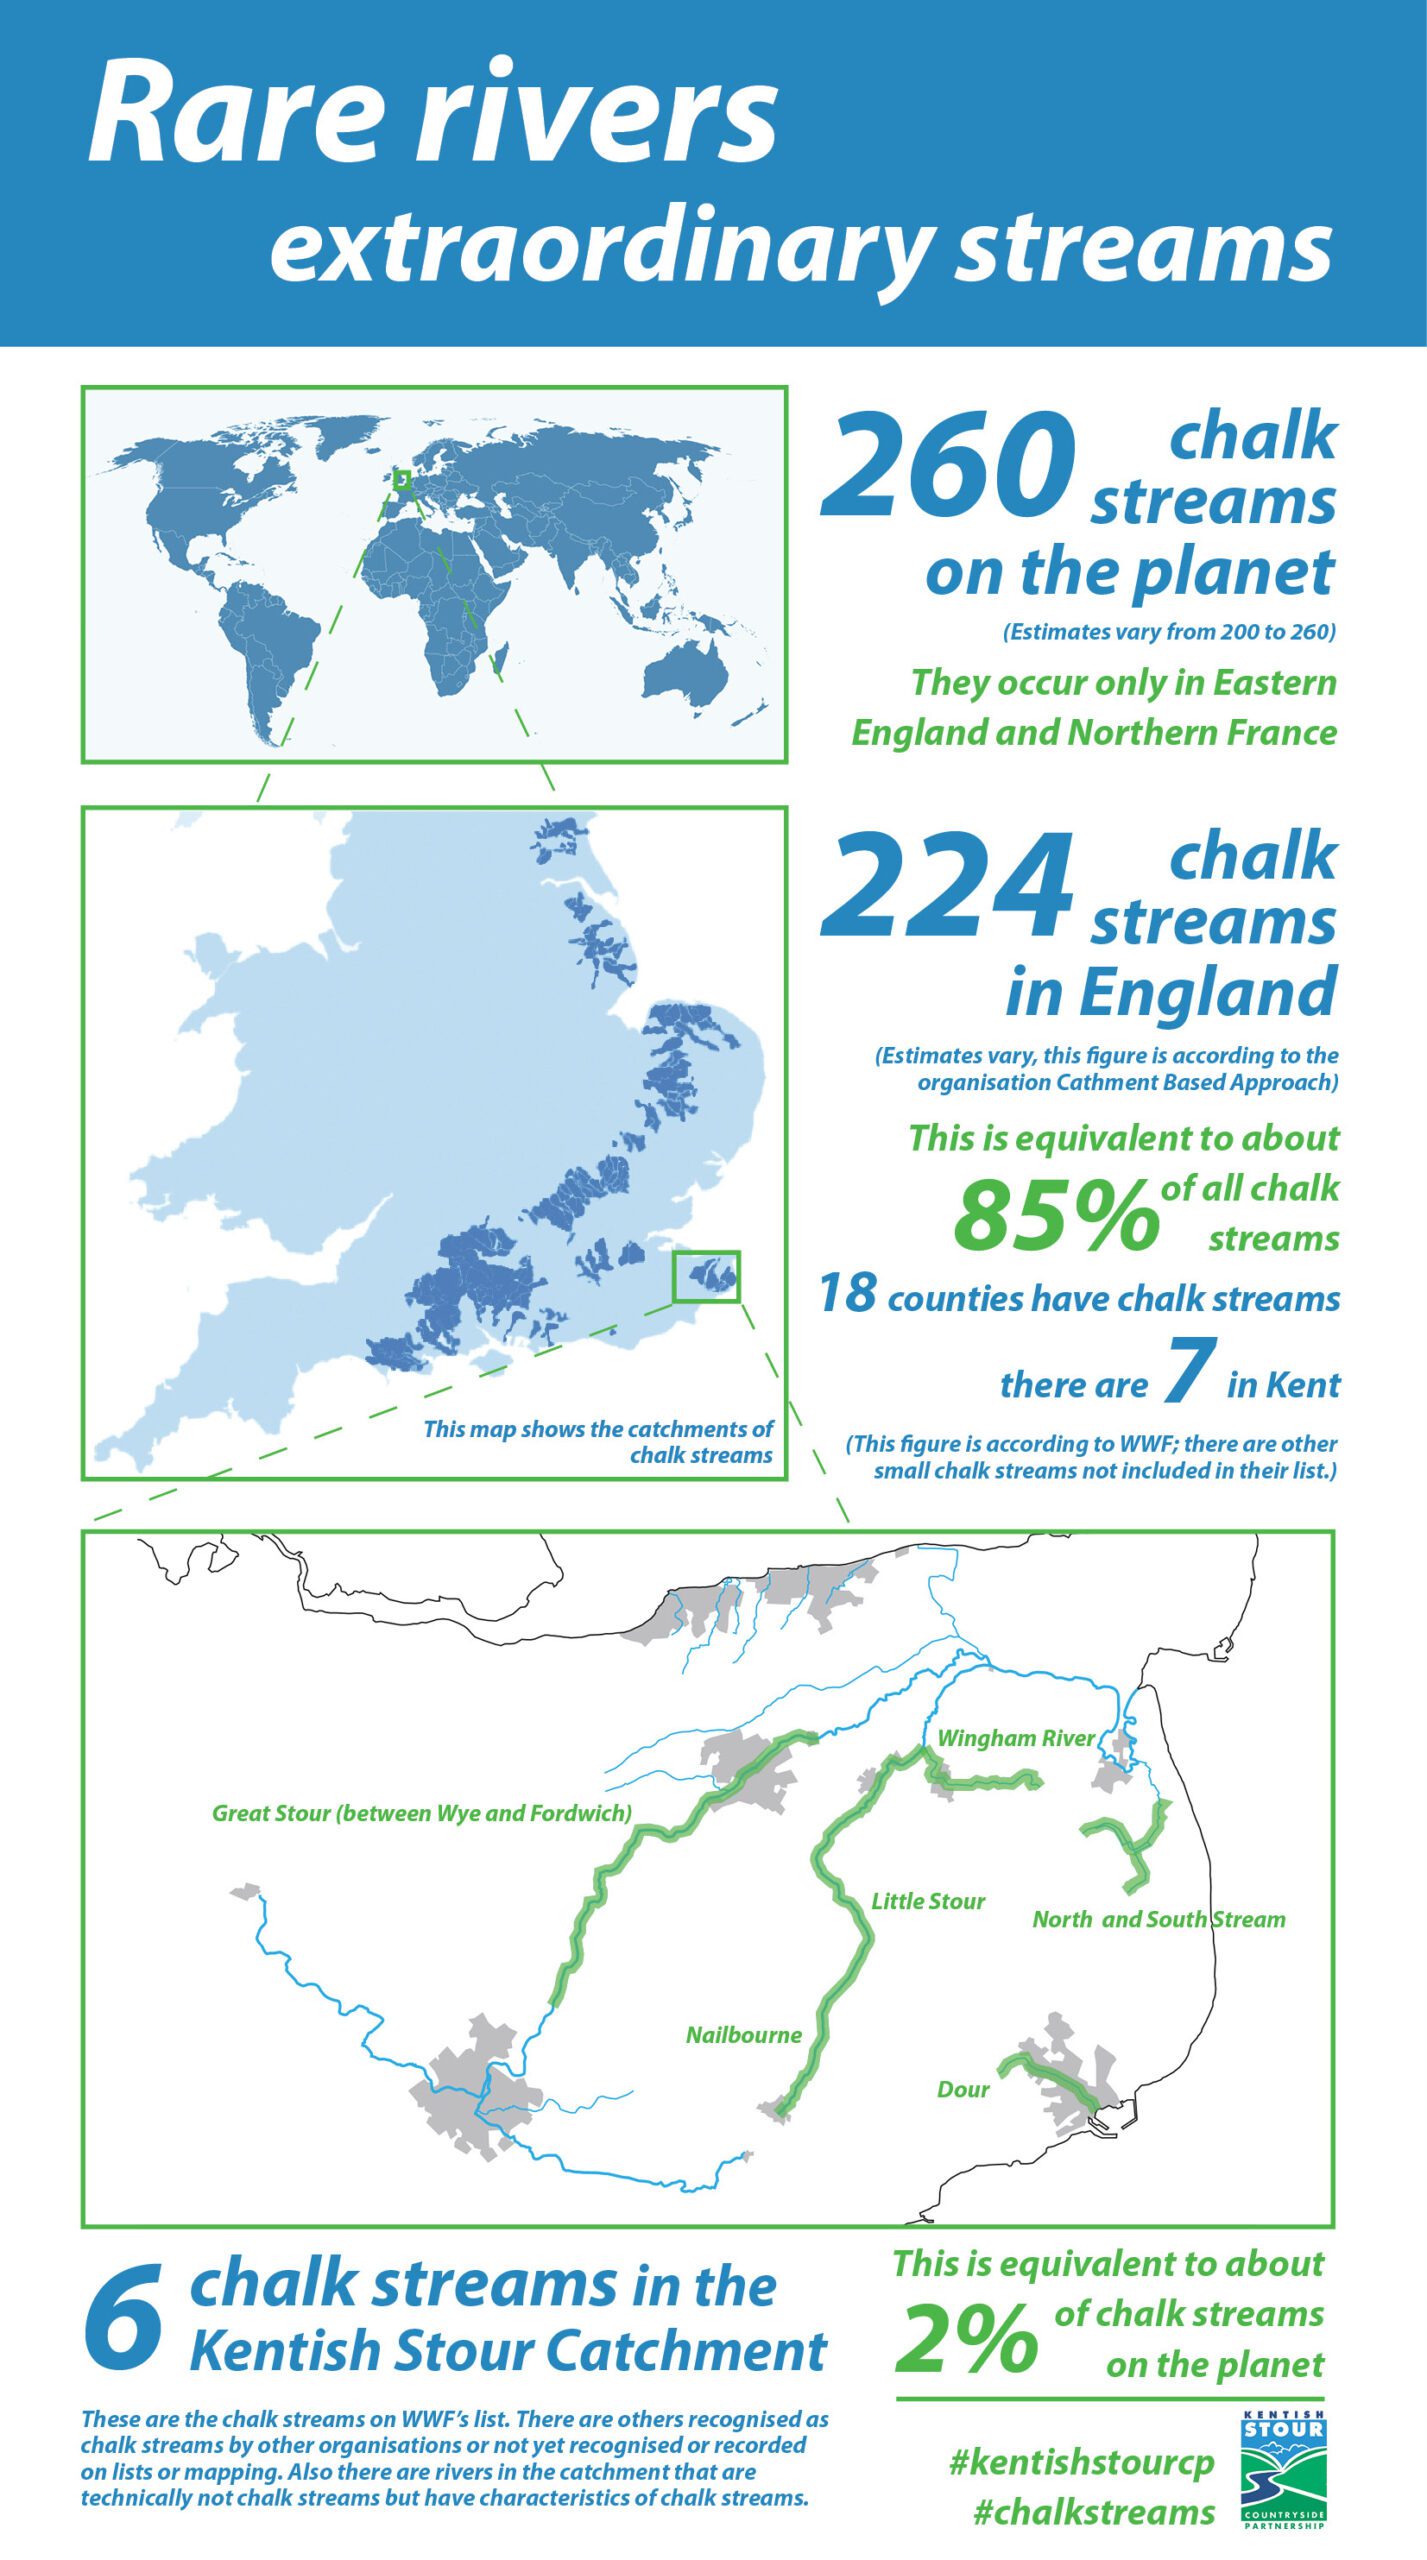 Amap-based infographic illustrating how chalk streams are globally rare